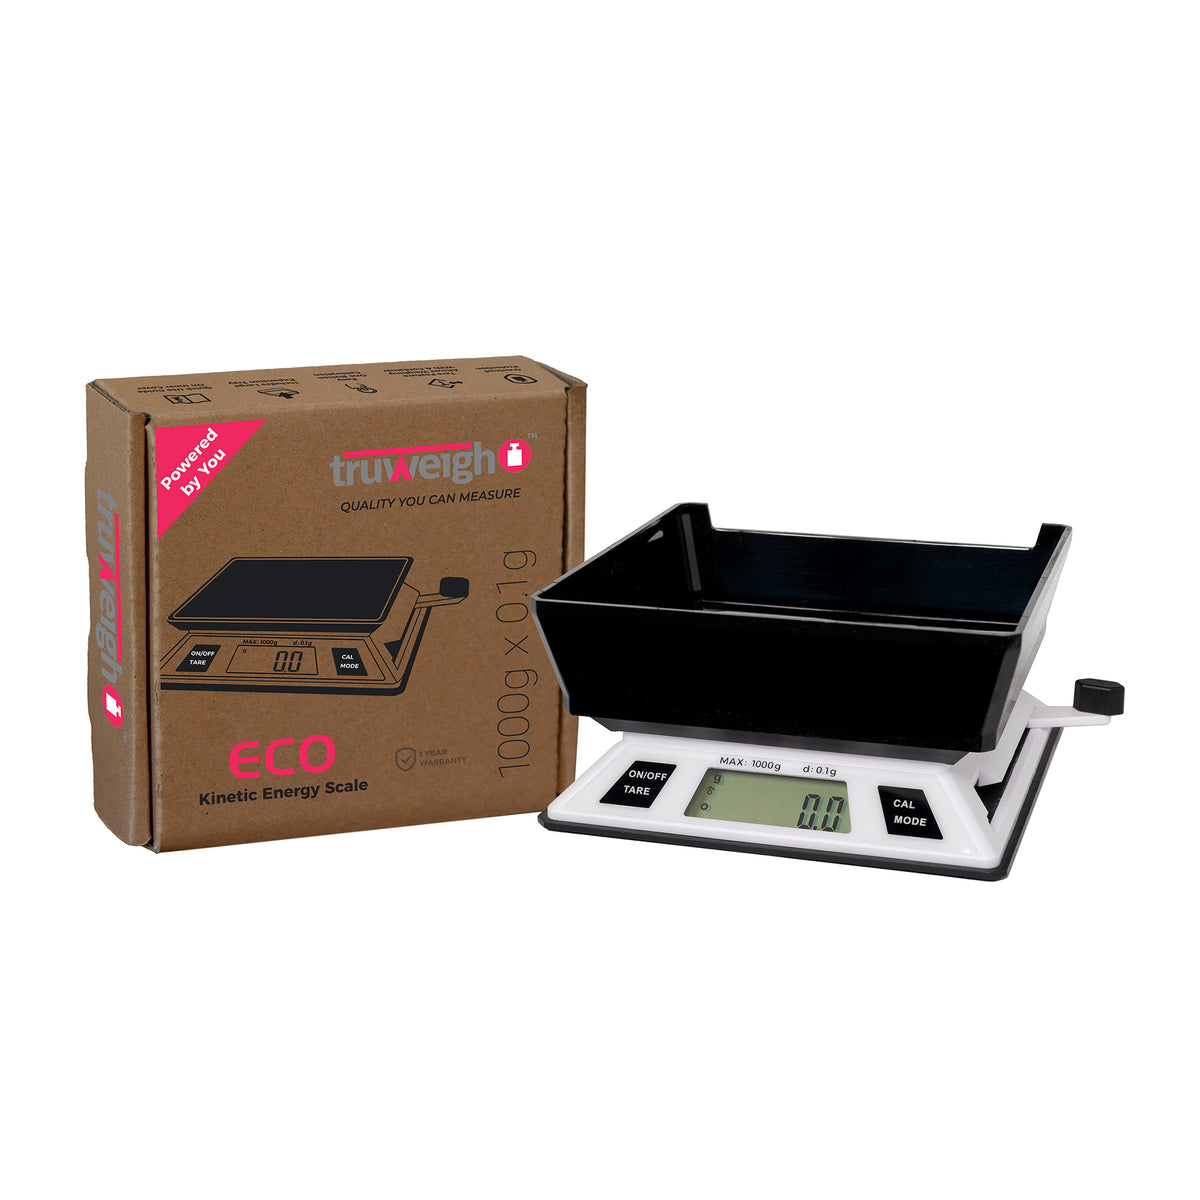 The Truweigh ECO Kinetic Energy scale is turned on with the tray on top, next to the box